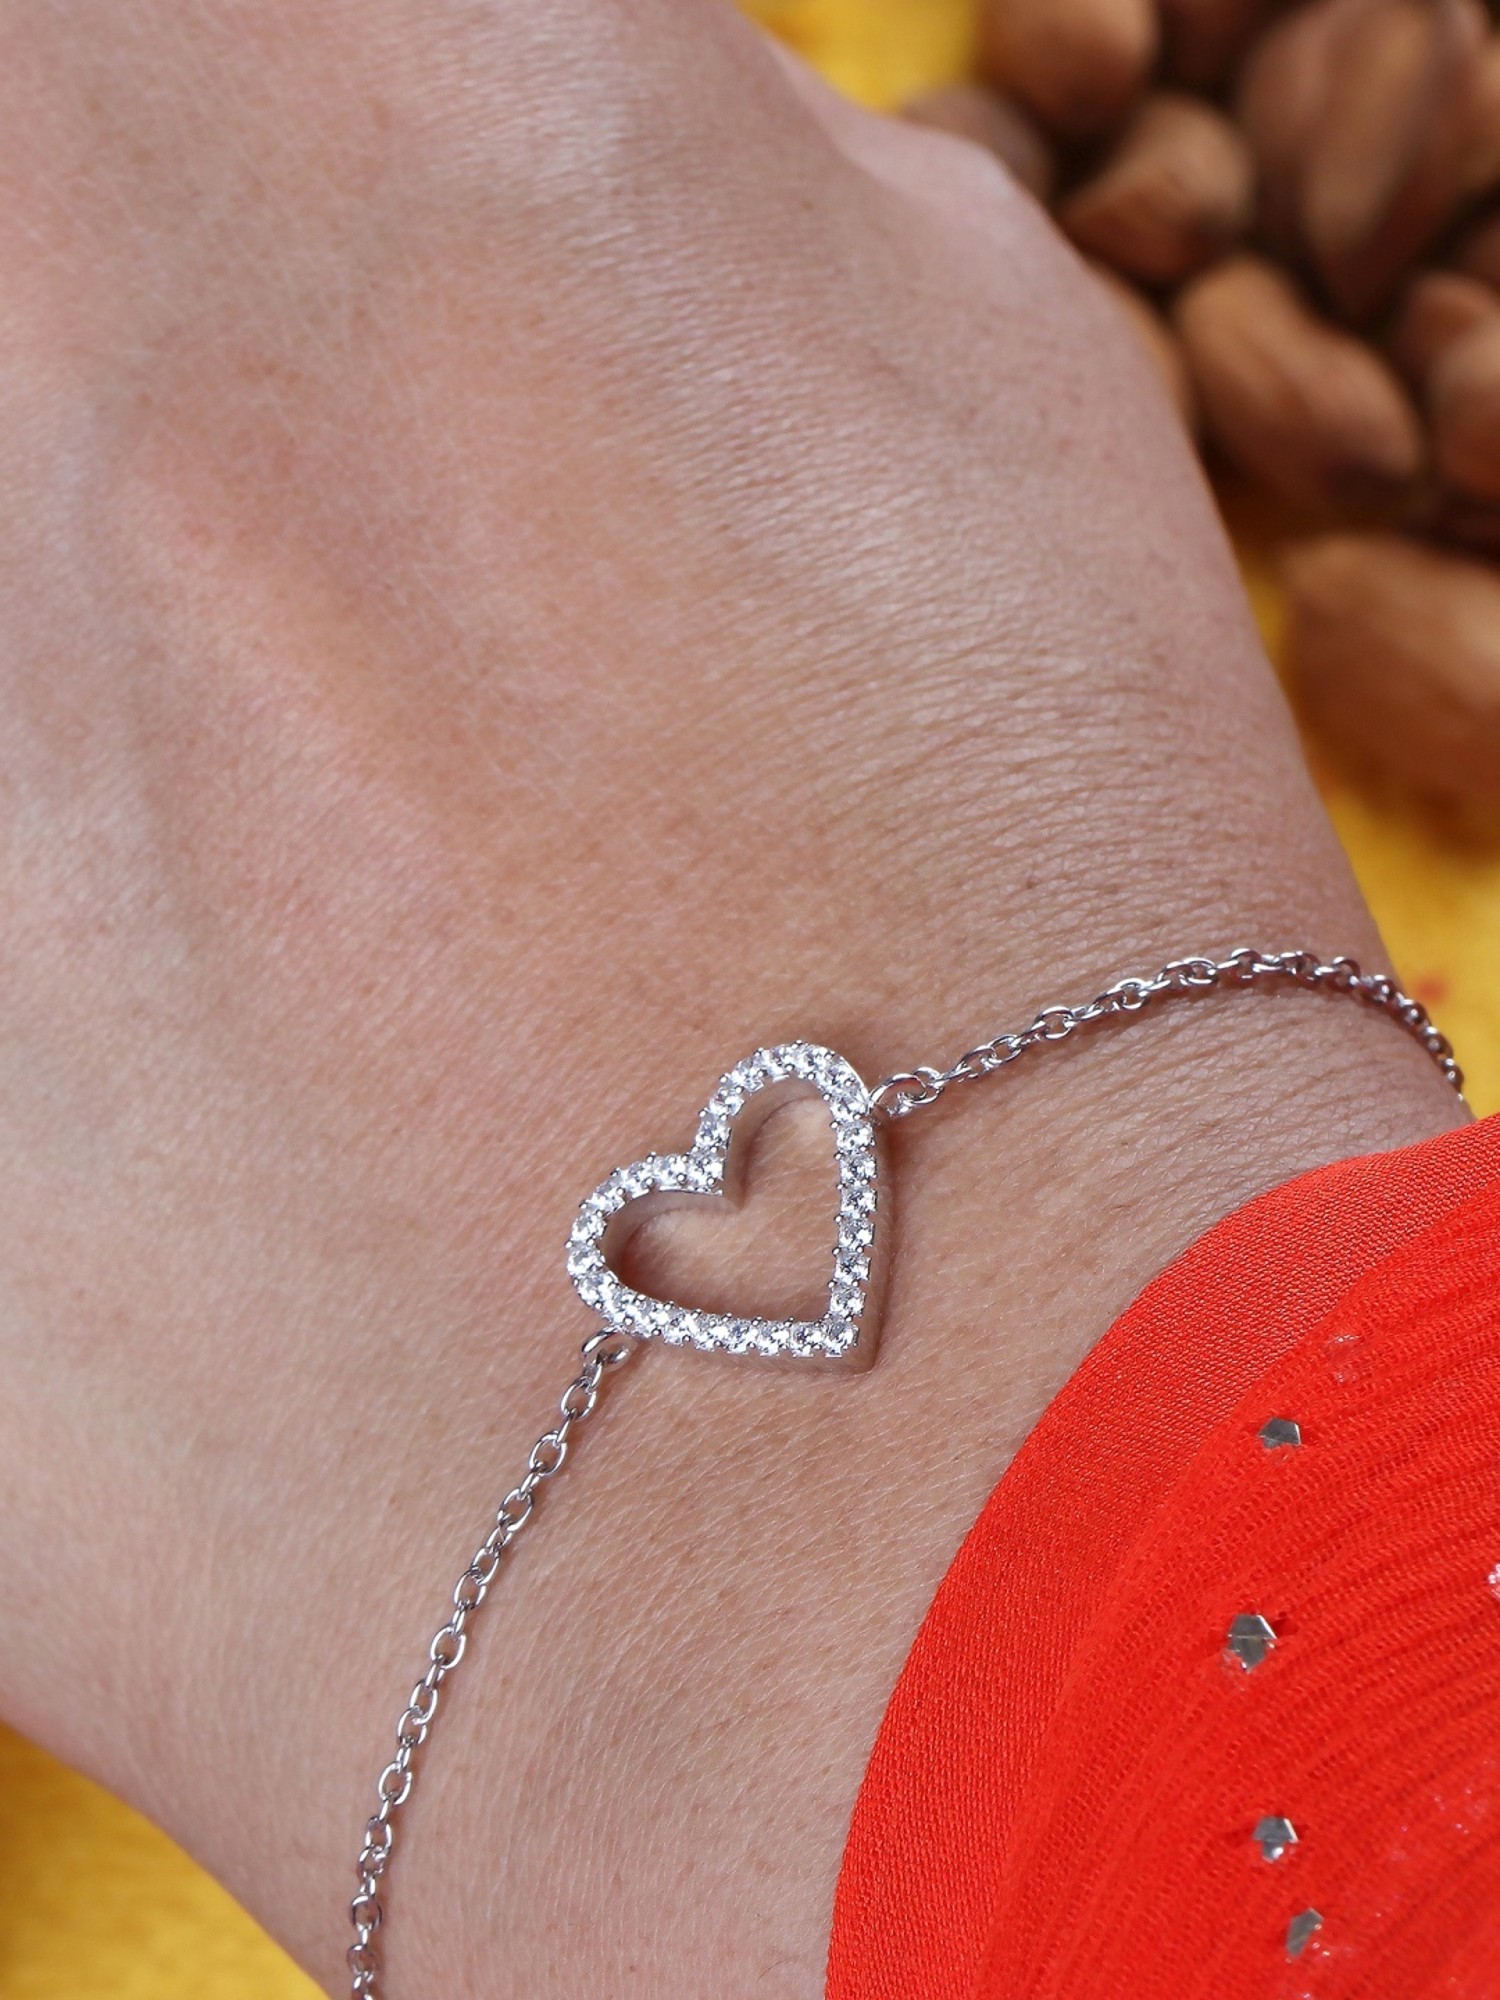 Buy Heart Bracelet Online In India - Etsy India-thunohoangphong.vn